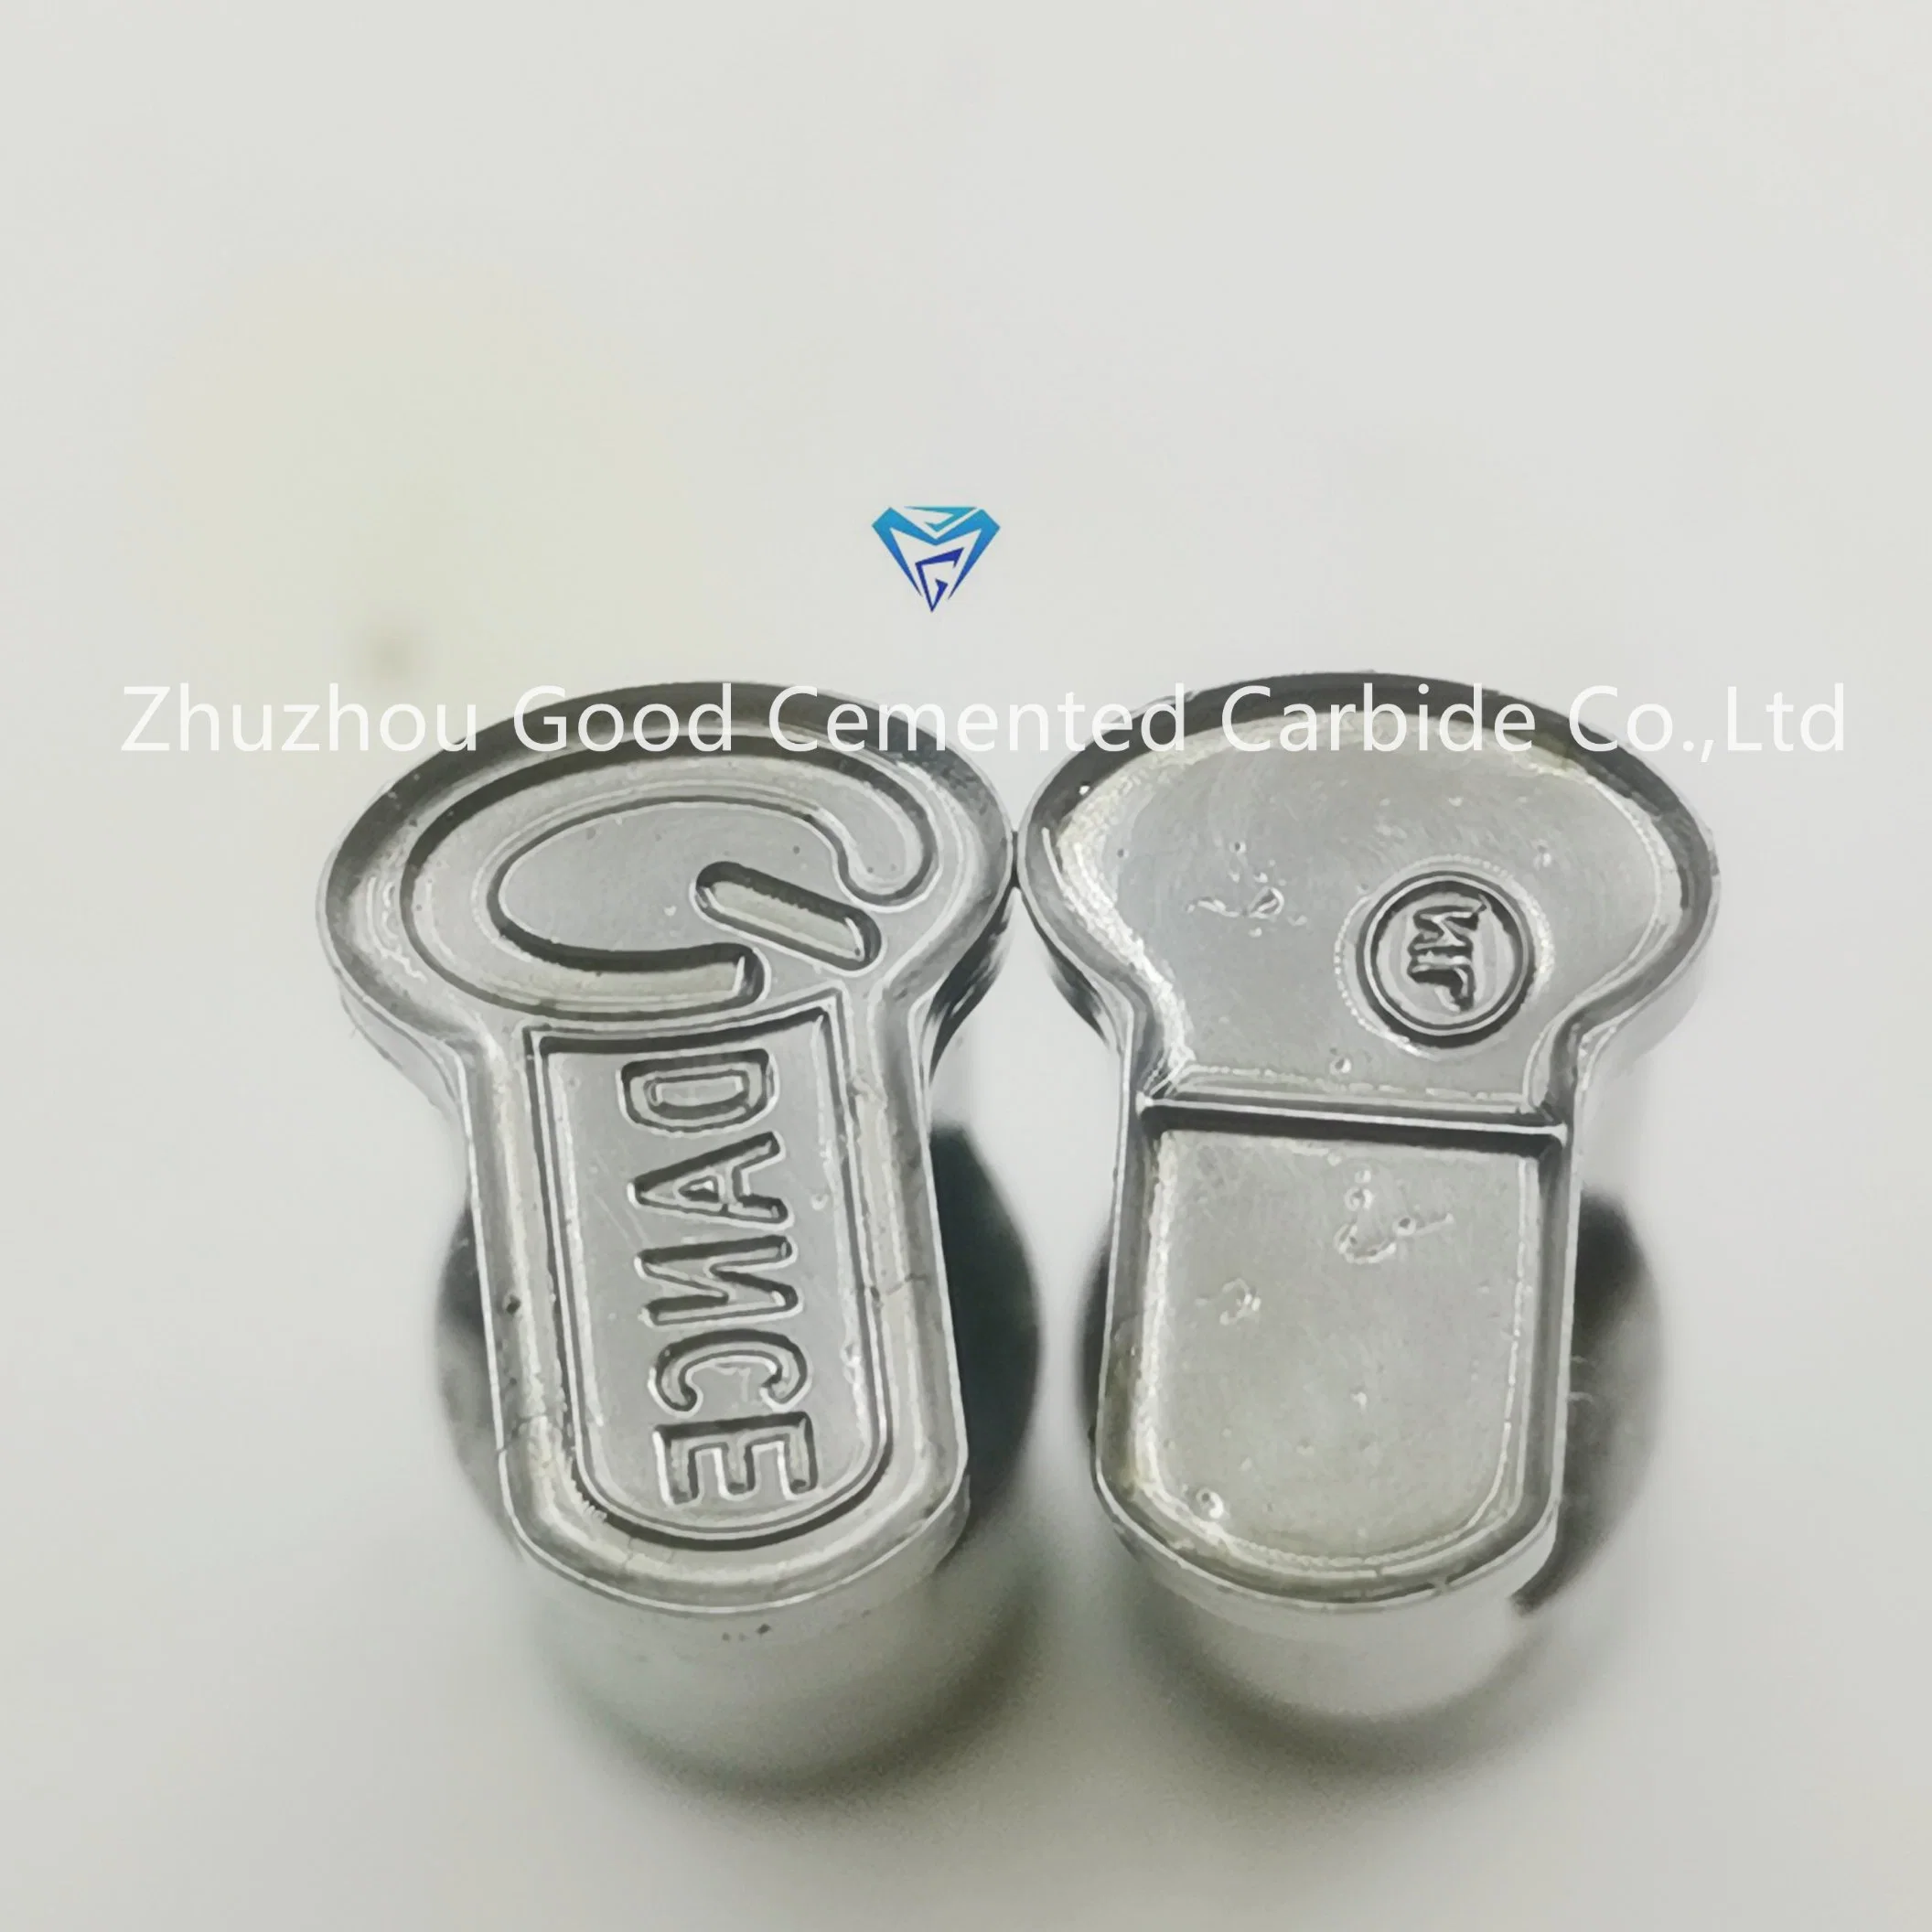 Cartoon Character Custom Logo Pill Die Set Tablet Punch Pill Making Stamp Moulds Tdp5 Tdp0 Tdp1.5 Punch Press Milk Tablet Mold 3D Brand Logo Punch Press Mold